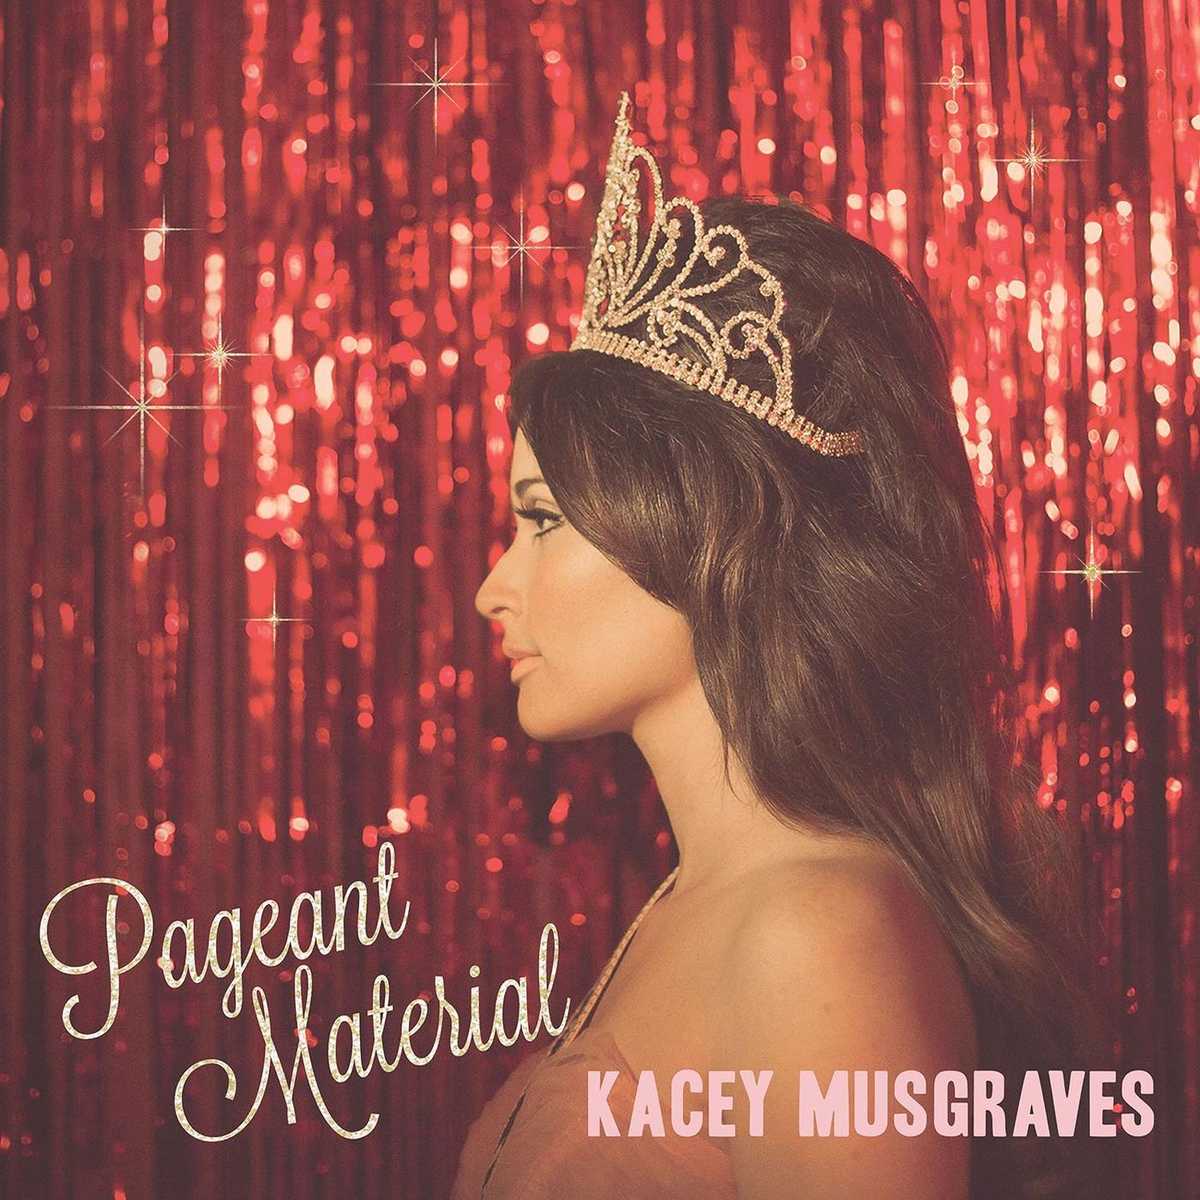 KaceyMusgraves_PageantMaterial